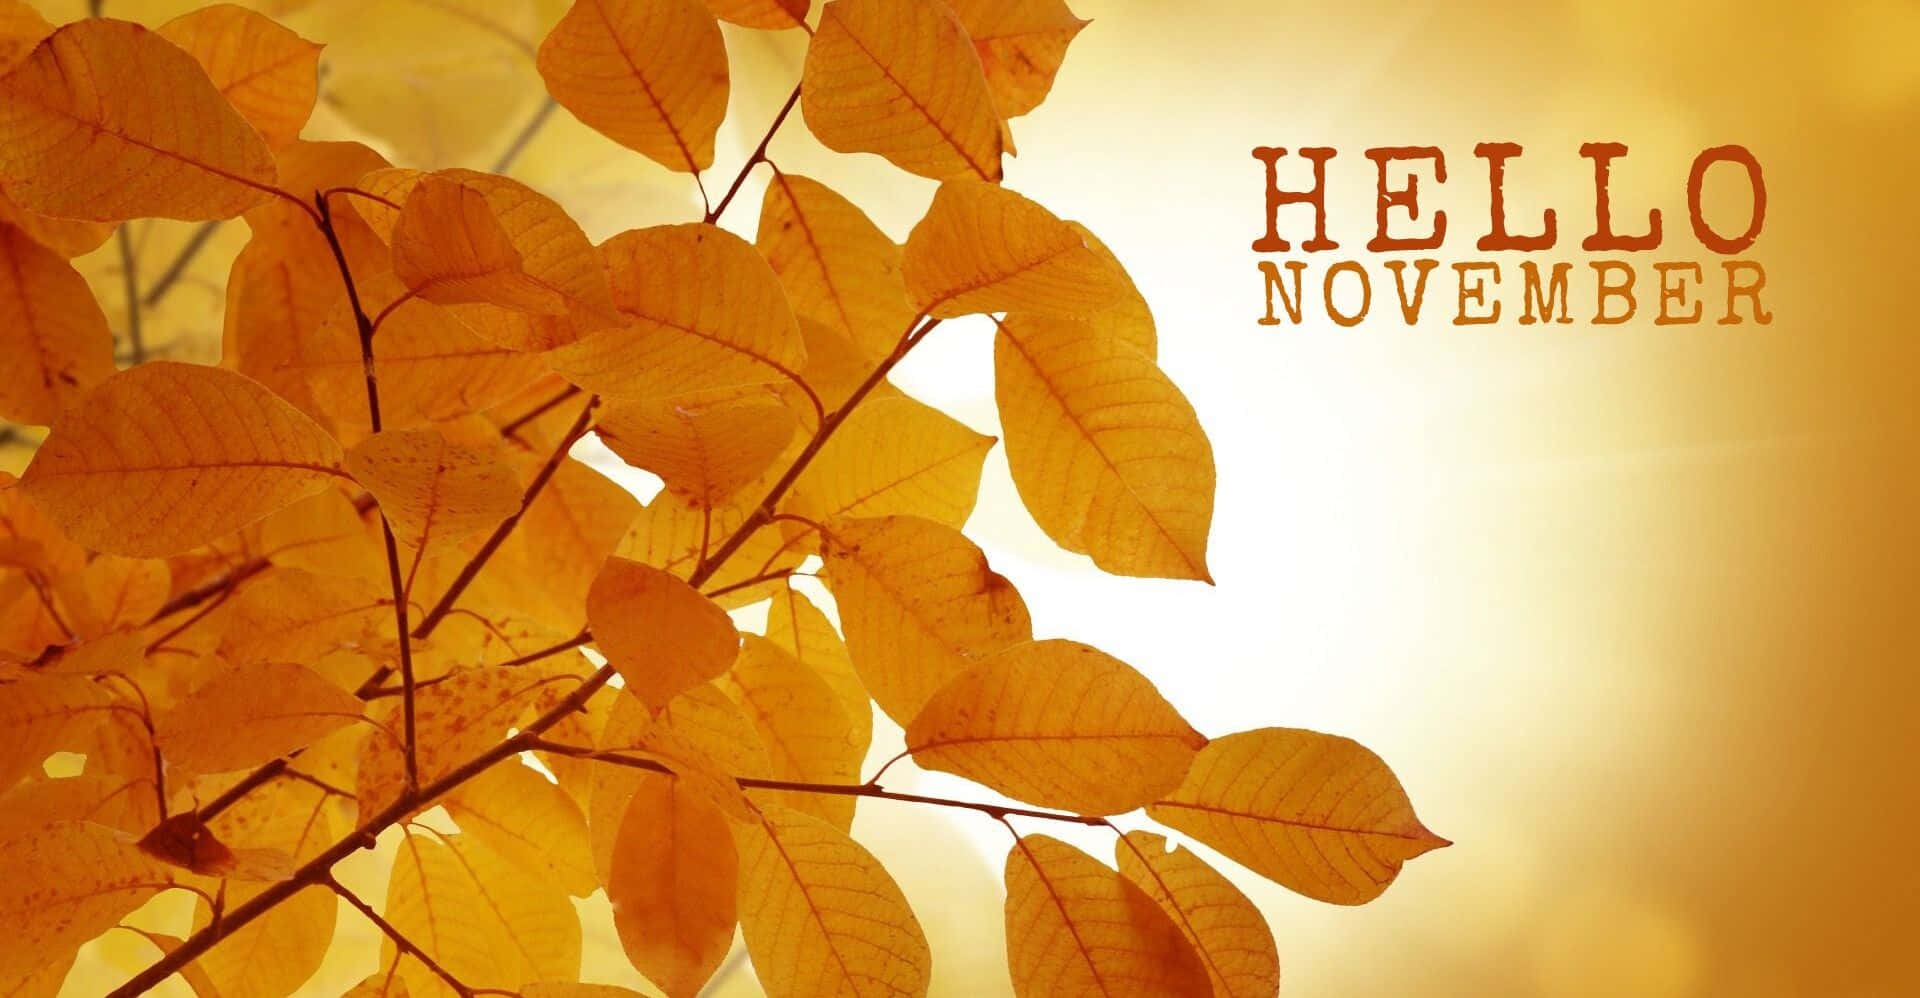 'a Sweet November Day!' Background